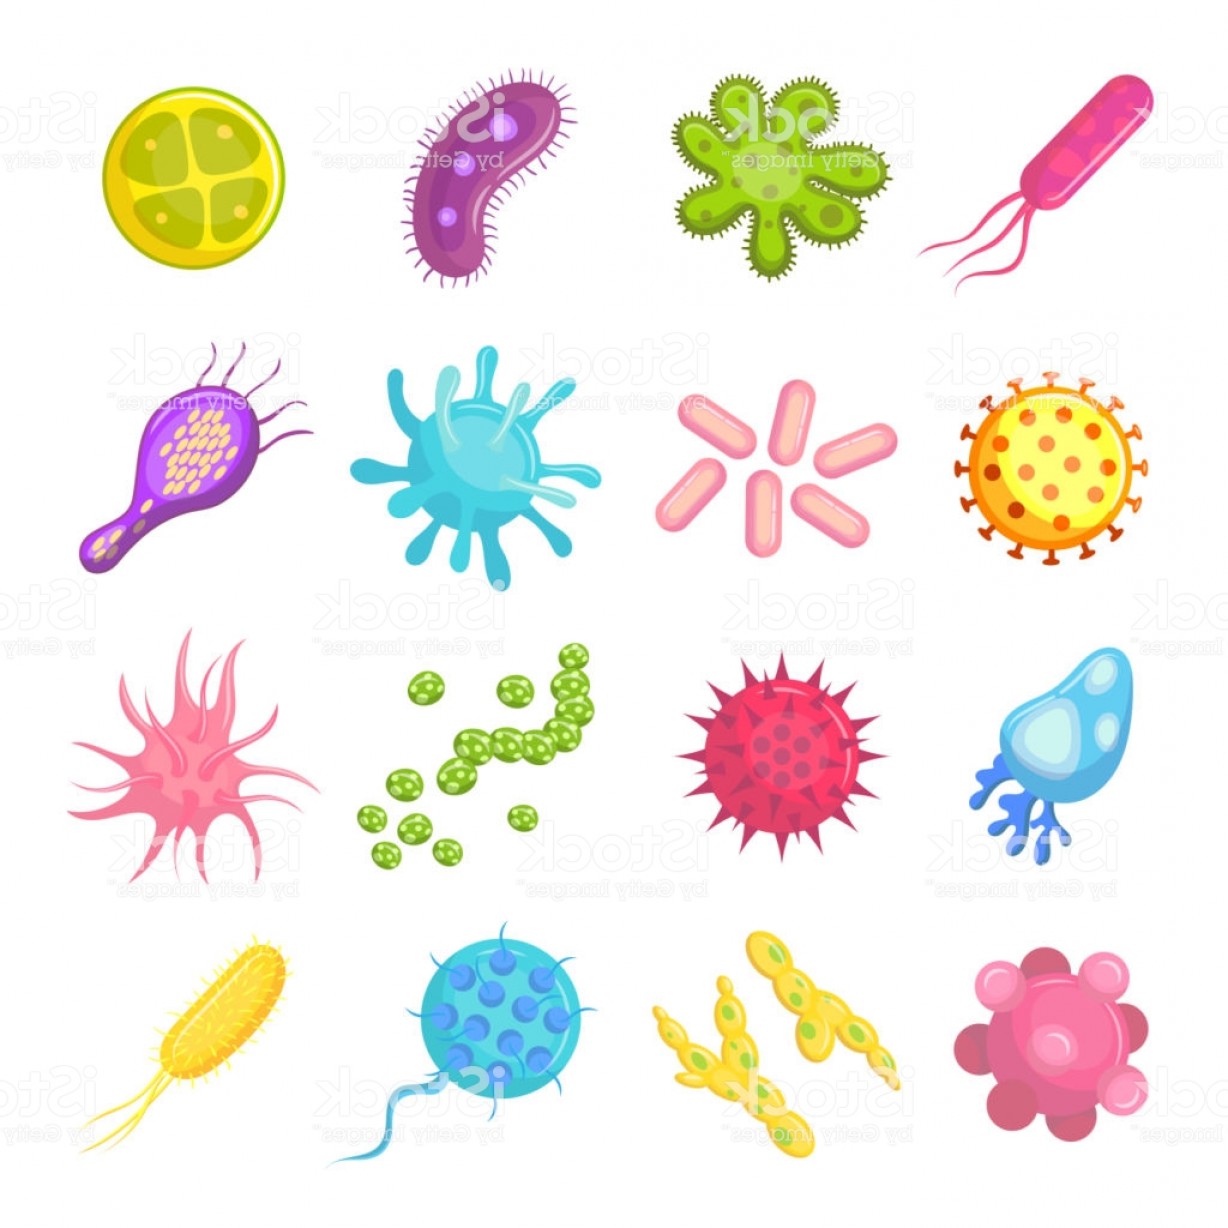 Germs clipart microscopic organism. Bacteria and colorful set